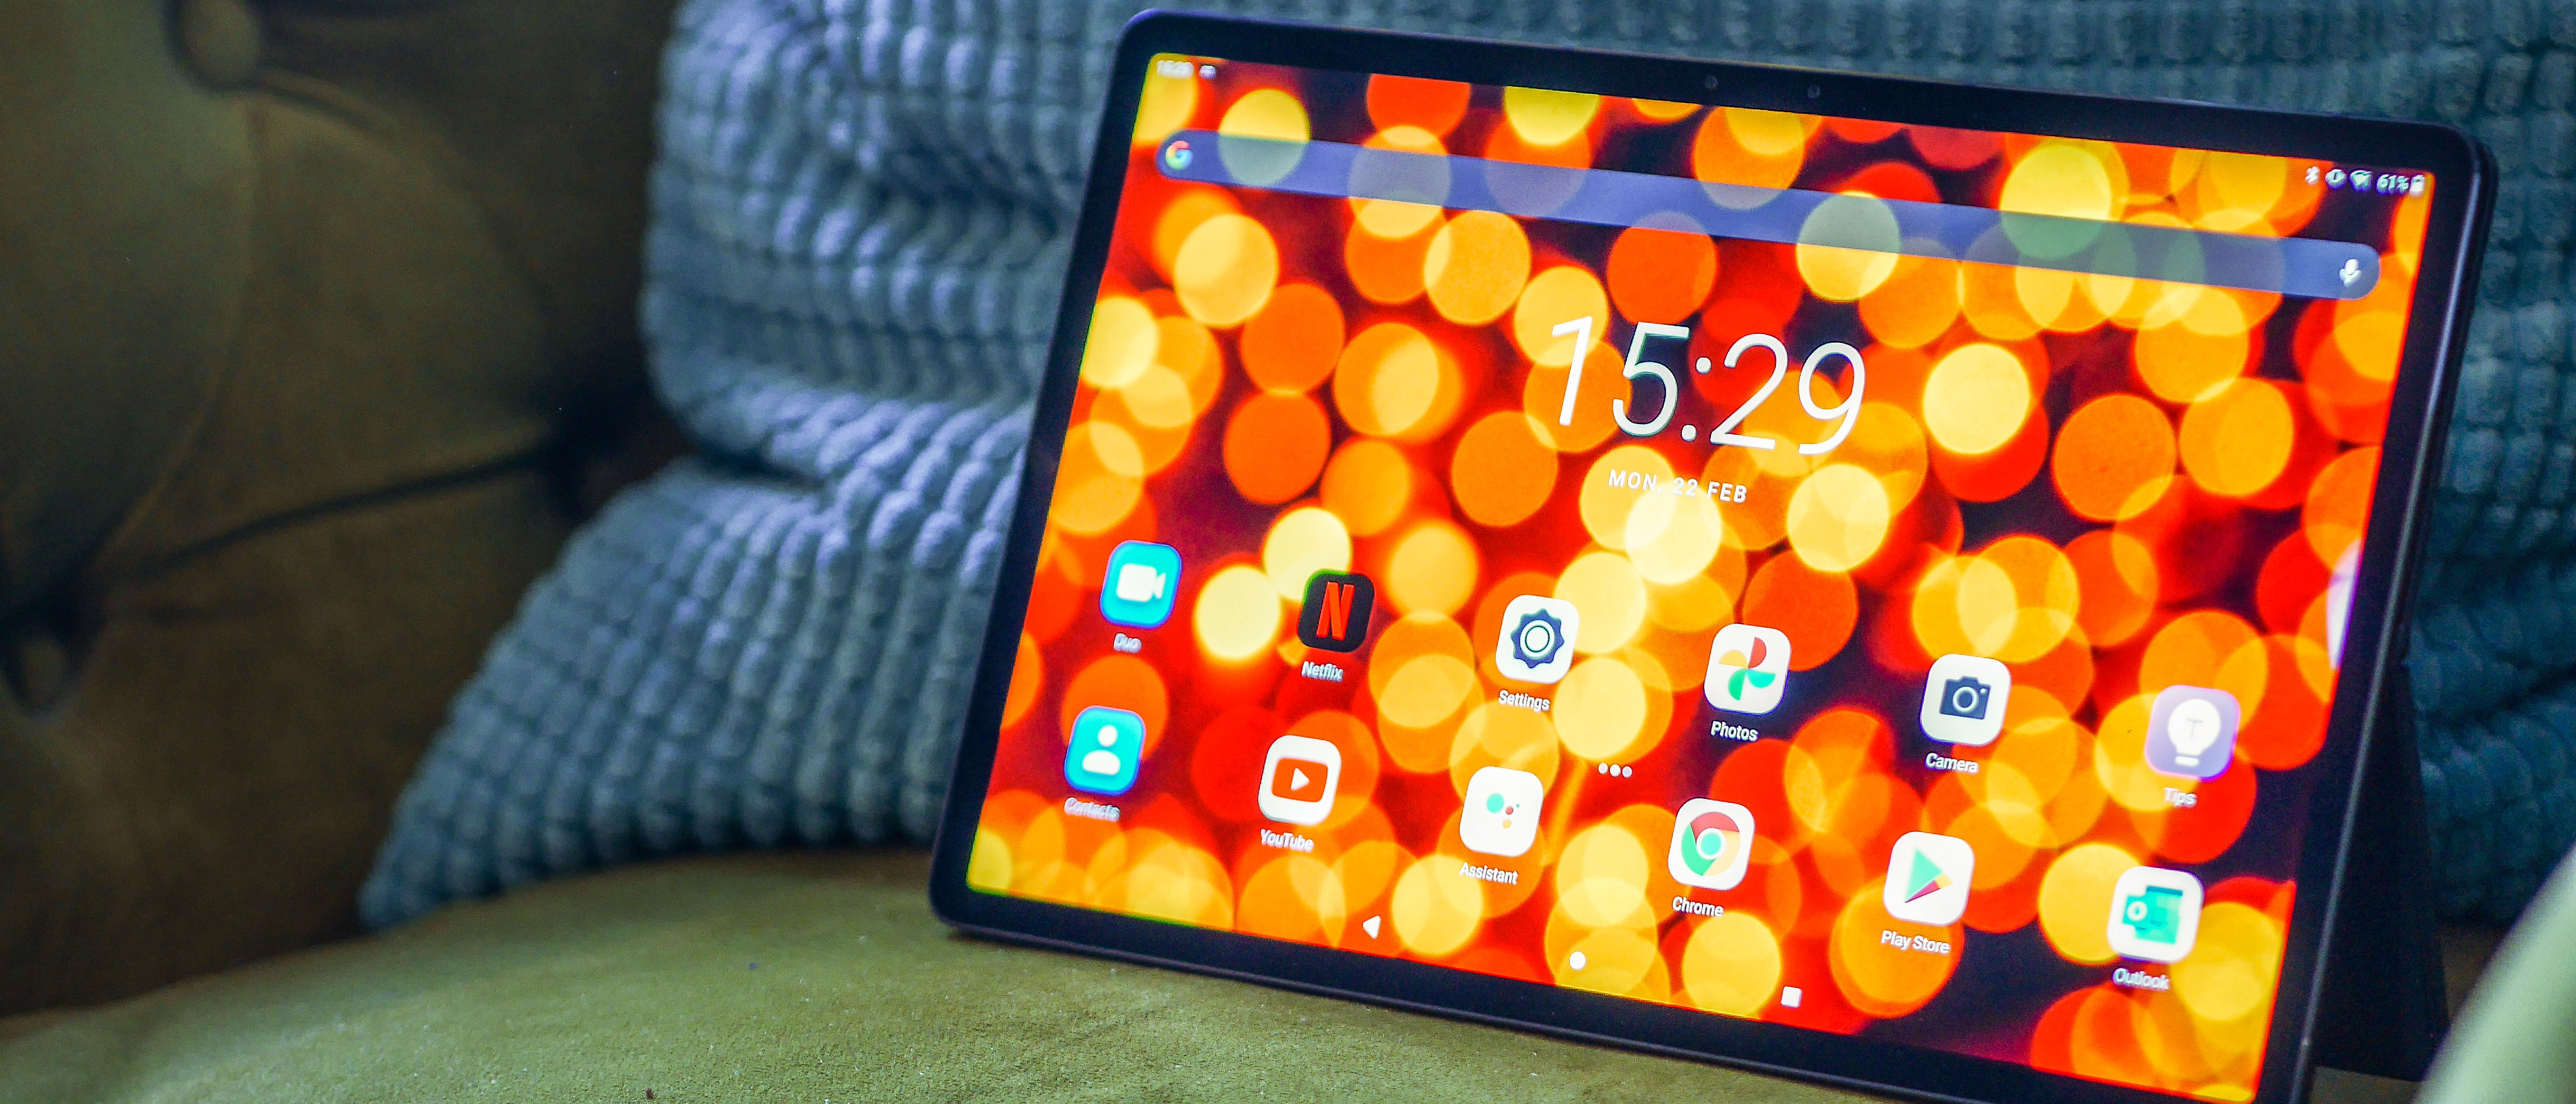 Lenovo Tab P11 Pro Is A Premium Android Tablet Without 5G - Tech